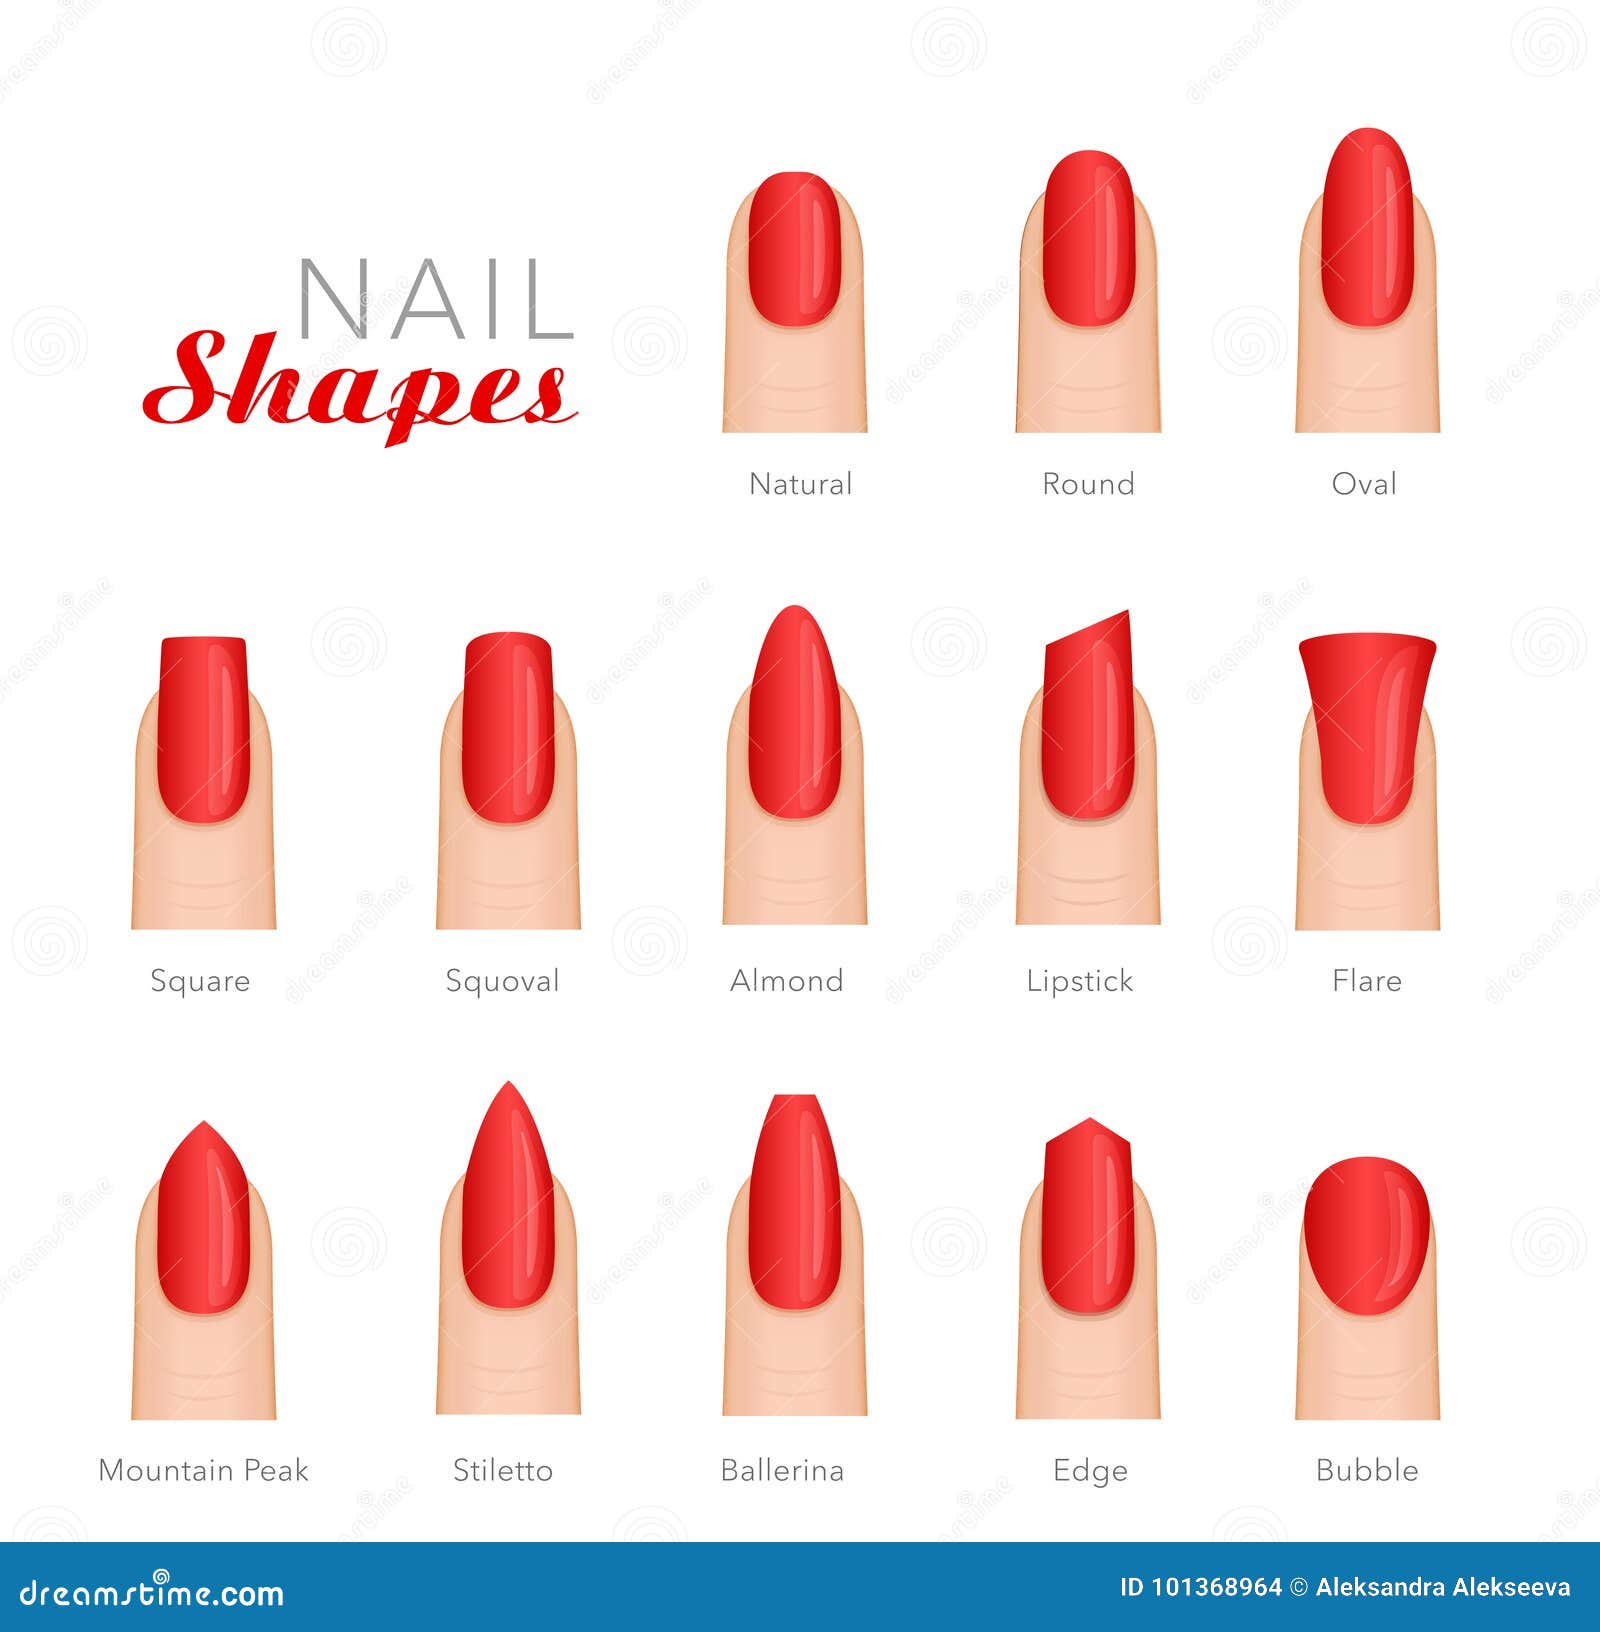 15 Best Round Nails and Smooth Shape Designs to Try for 2020